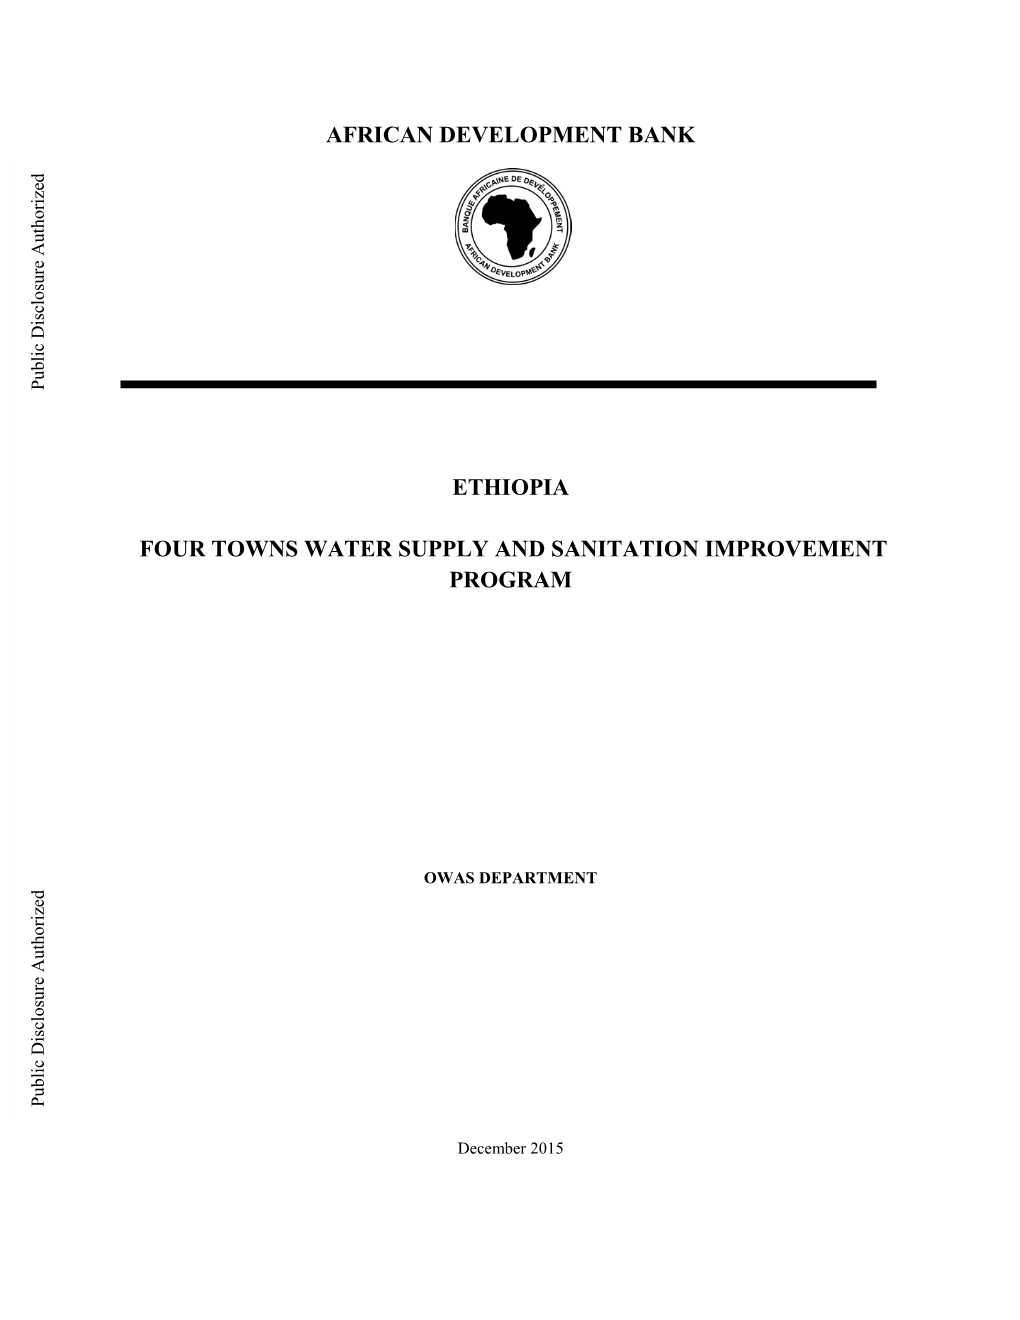 African Development Bank Ethiopia Four Towns Water Supply and Sanitation Improvement Program